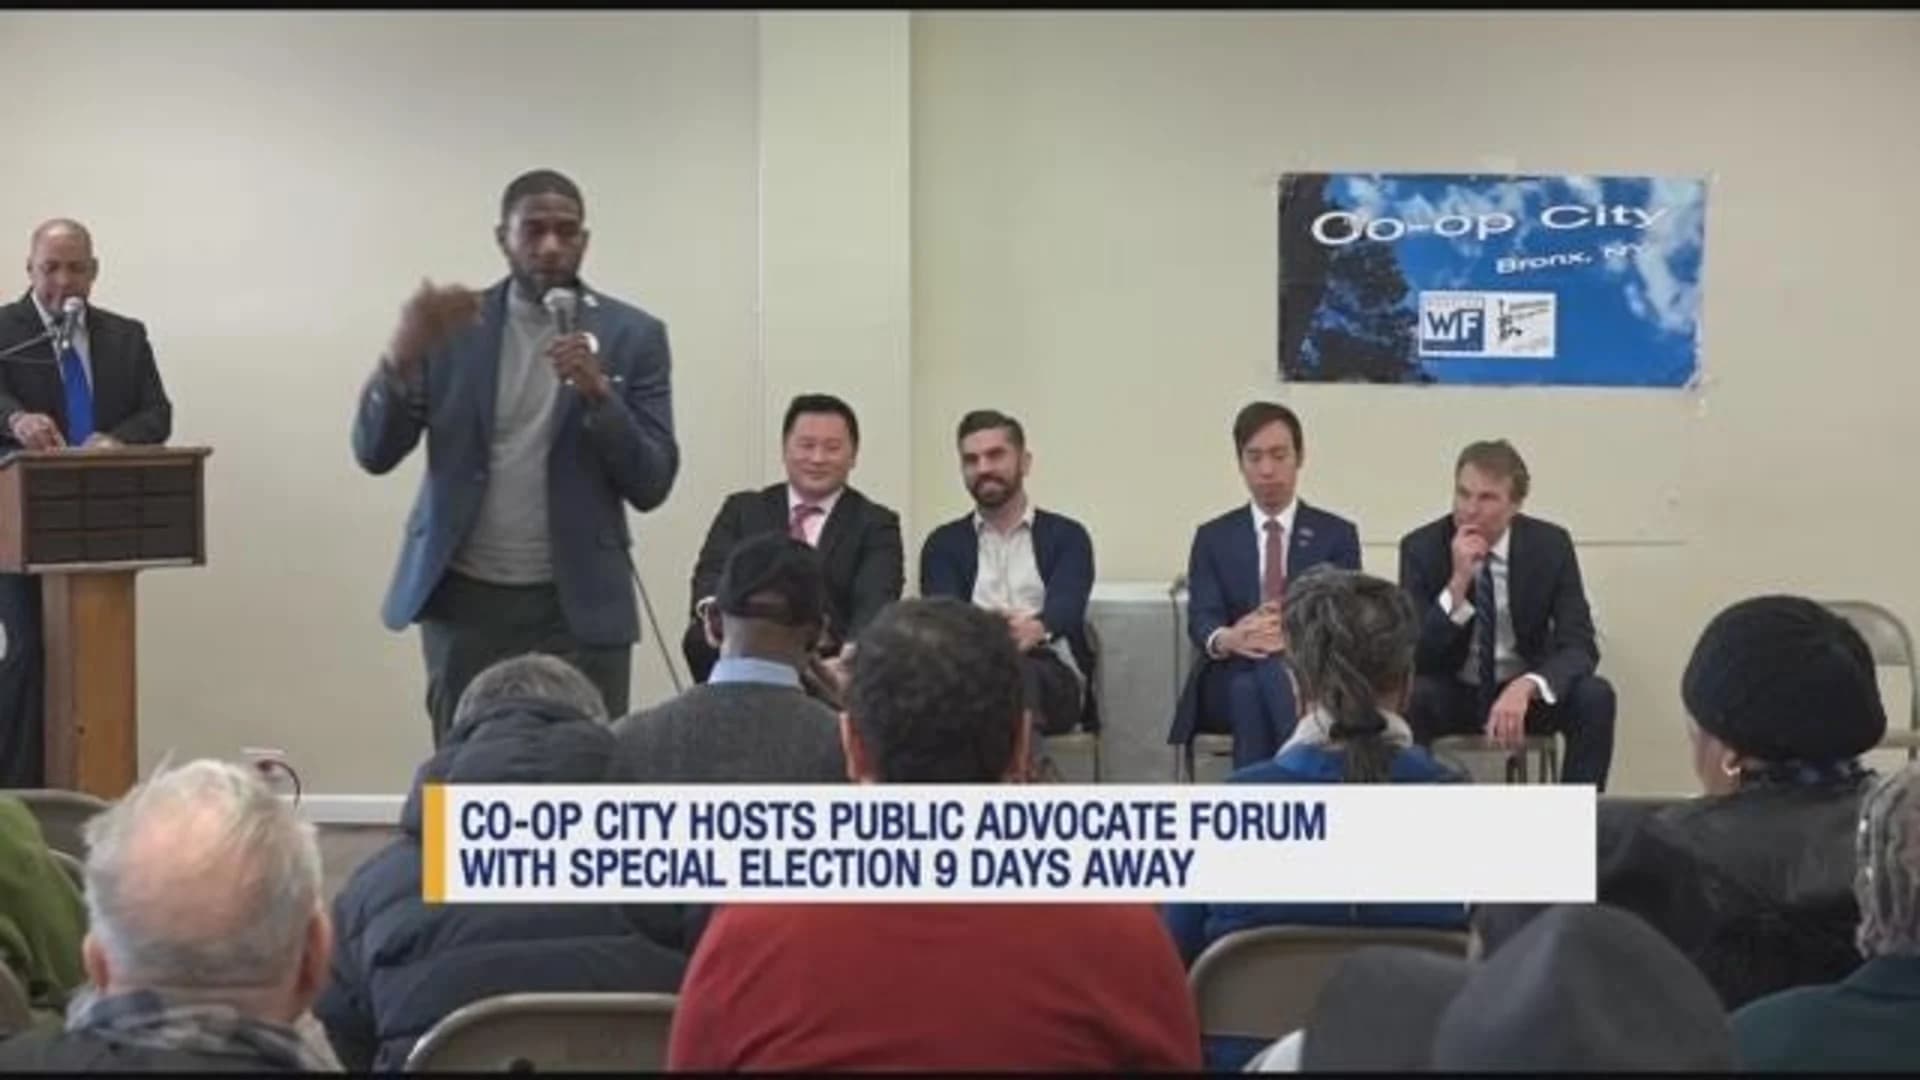 Voters get closer look at public advocate candidates at Co-op City forum